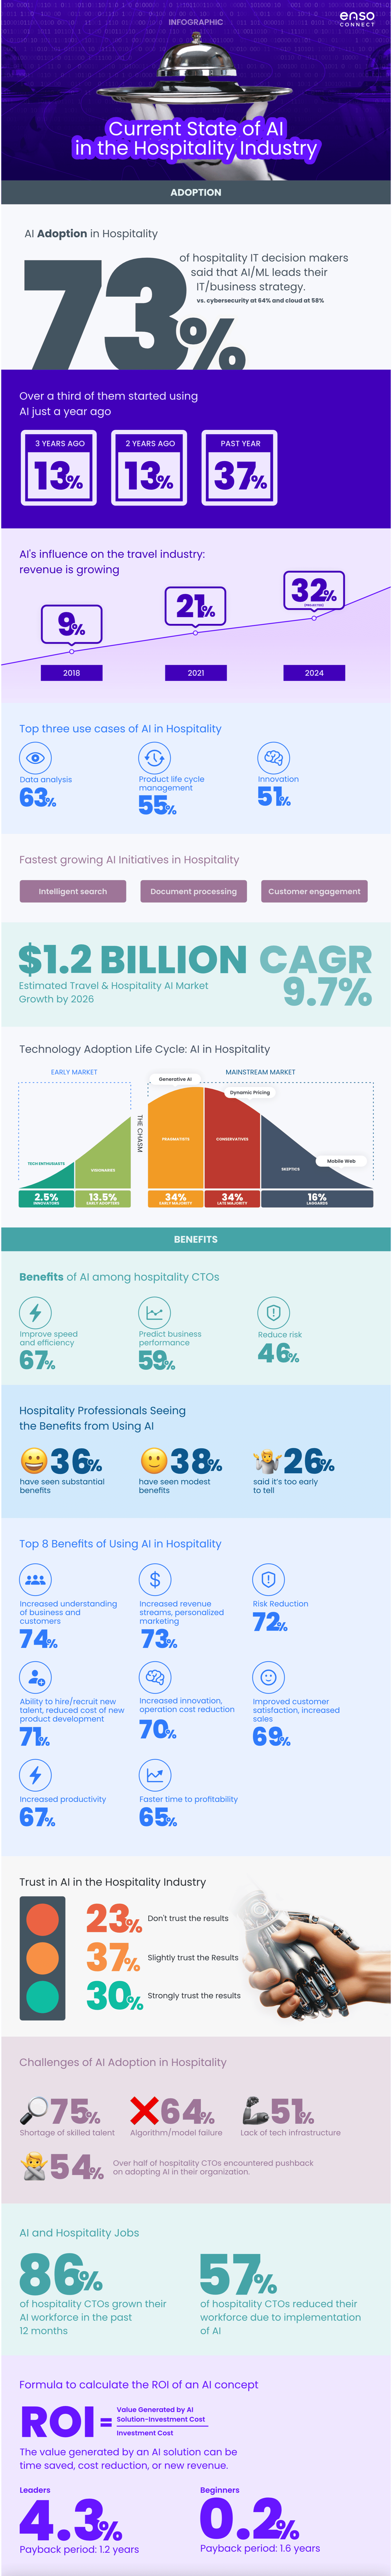 Current State of AI the Hospitality Industry Infographic